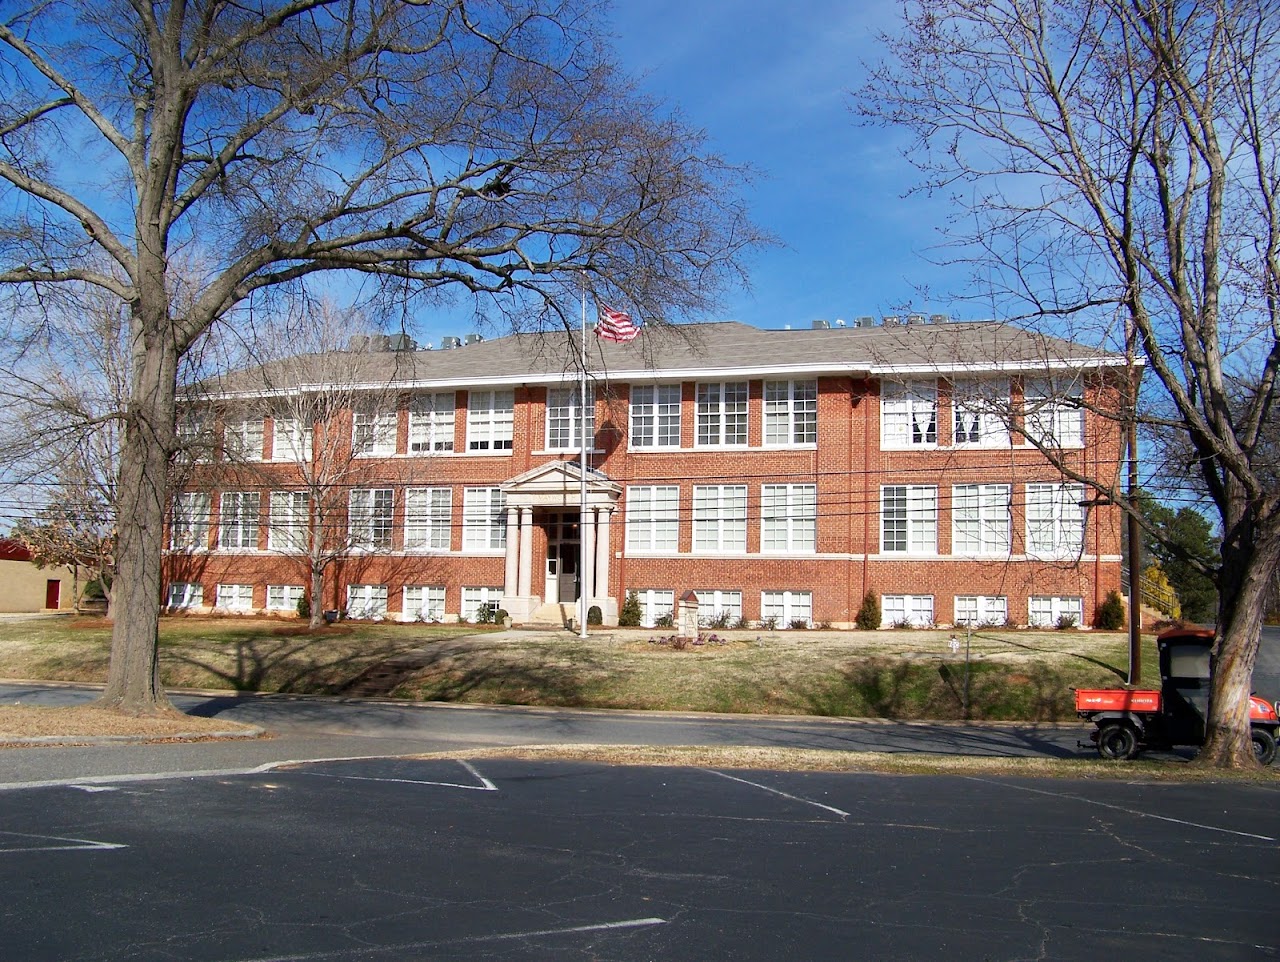 Photo of MAYWORTH SCHOOL APARTMENTS. Affordable housing located at 236 EIGHTH AVENUE CRAMERTON, NC 28032